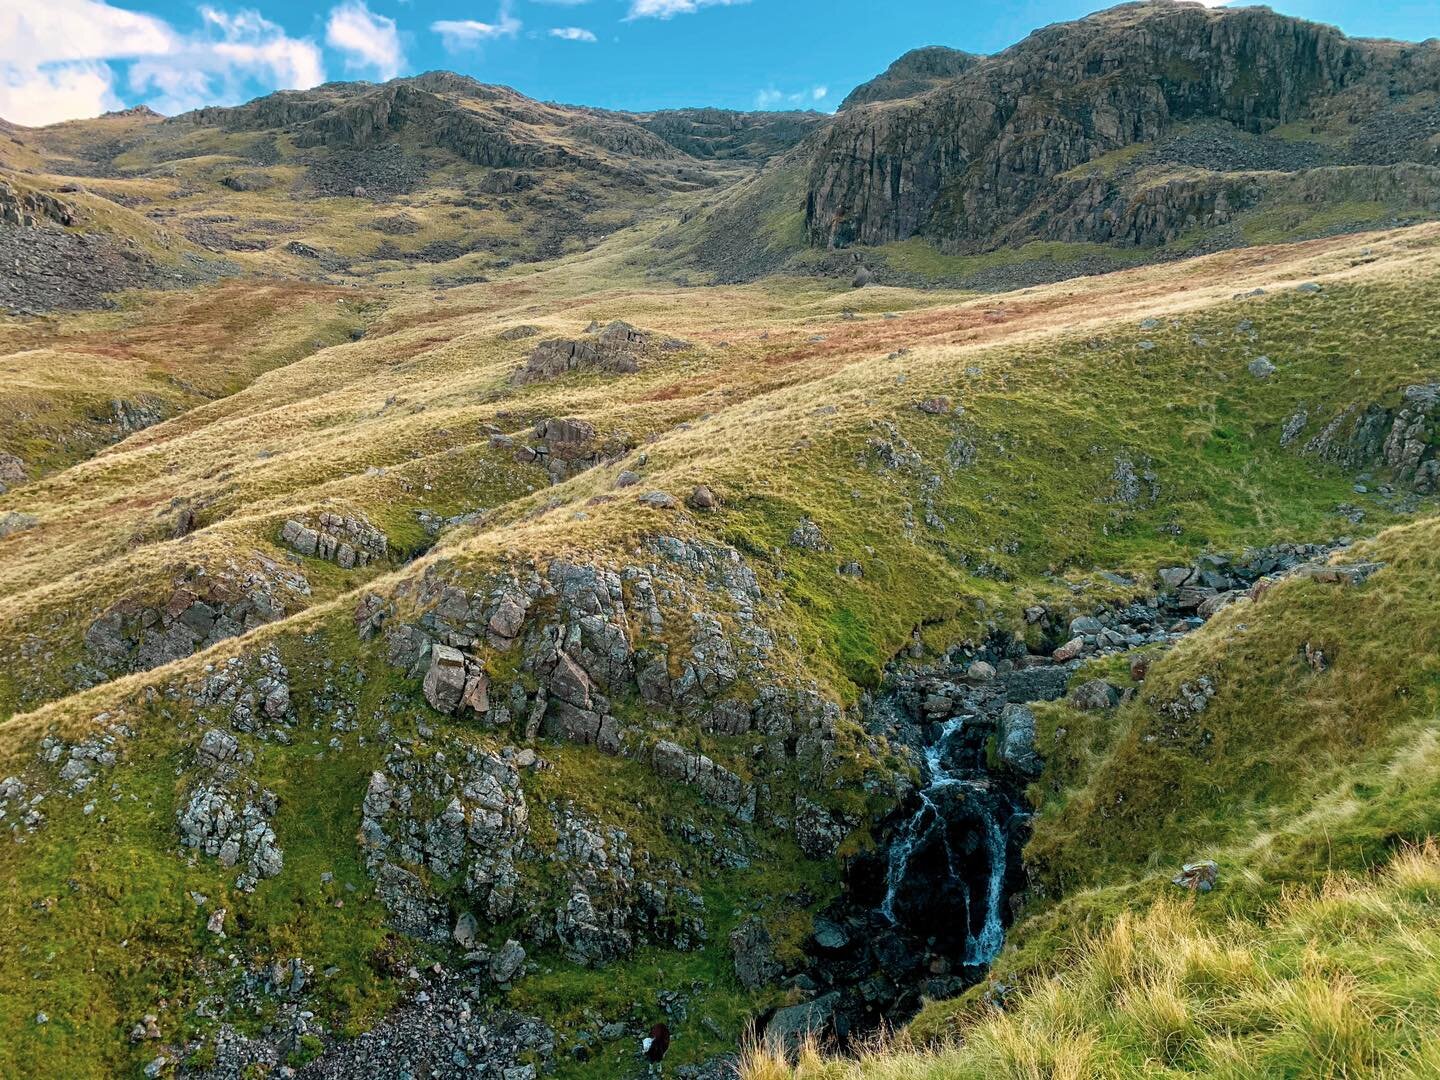 Scafell Pike is the tallest mountain in England and one of three prominent peaks in the UK. 

A peak for each country, these mountains stand the tallest for their nation- the other two are Ben Nevis in Scotland and Mt. Snowdon in Wales. 

These three